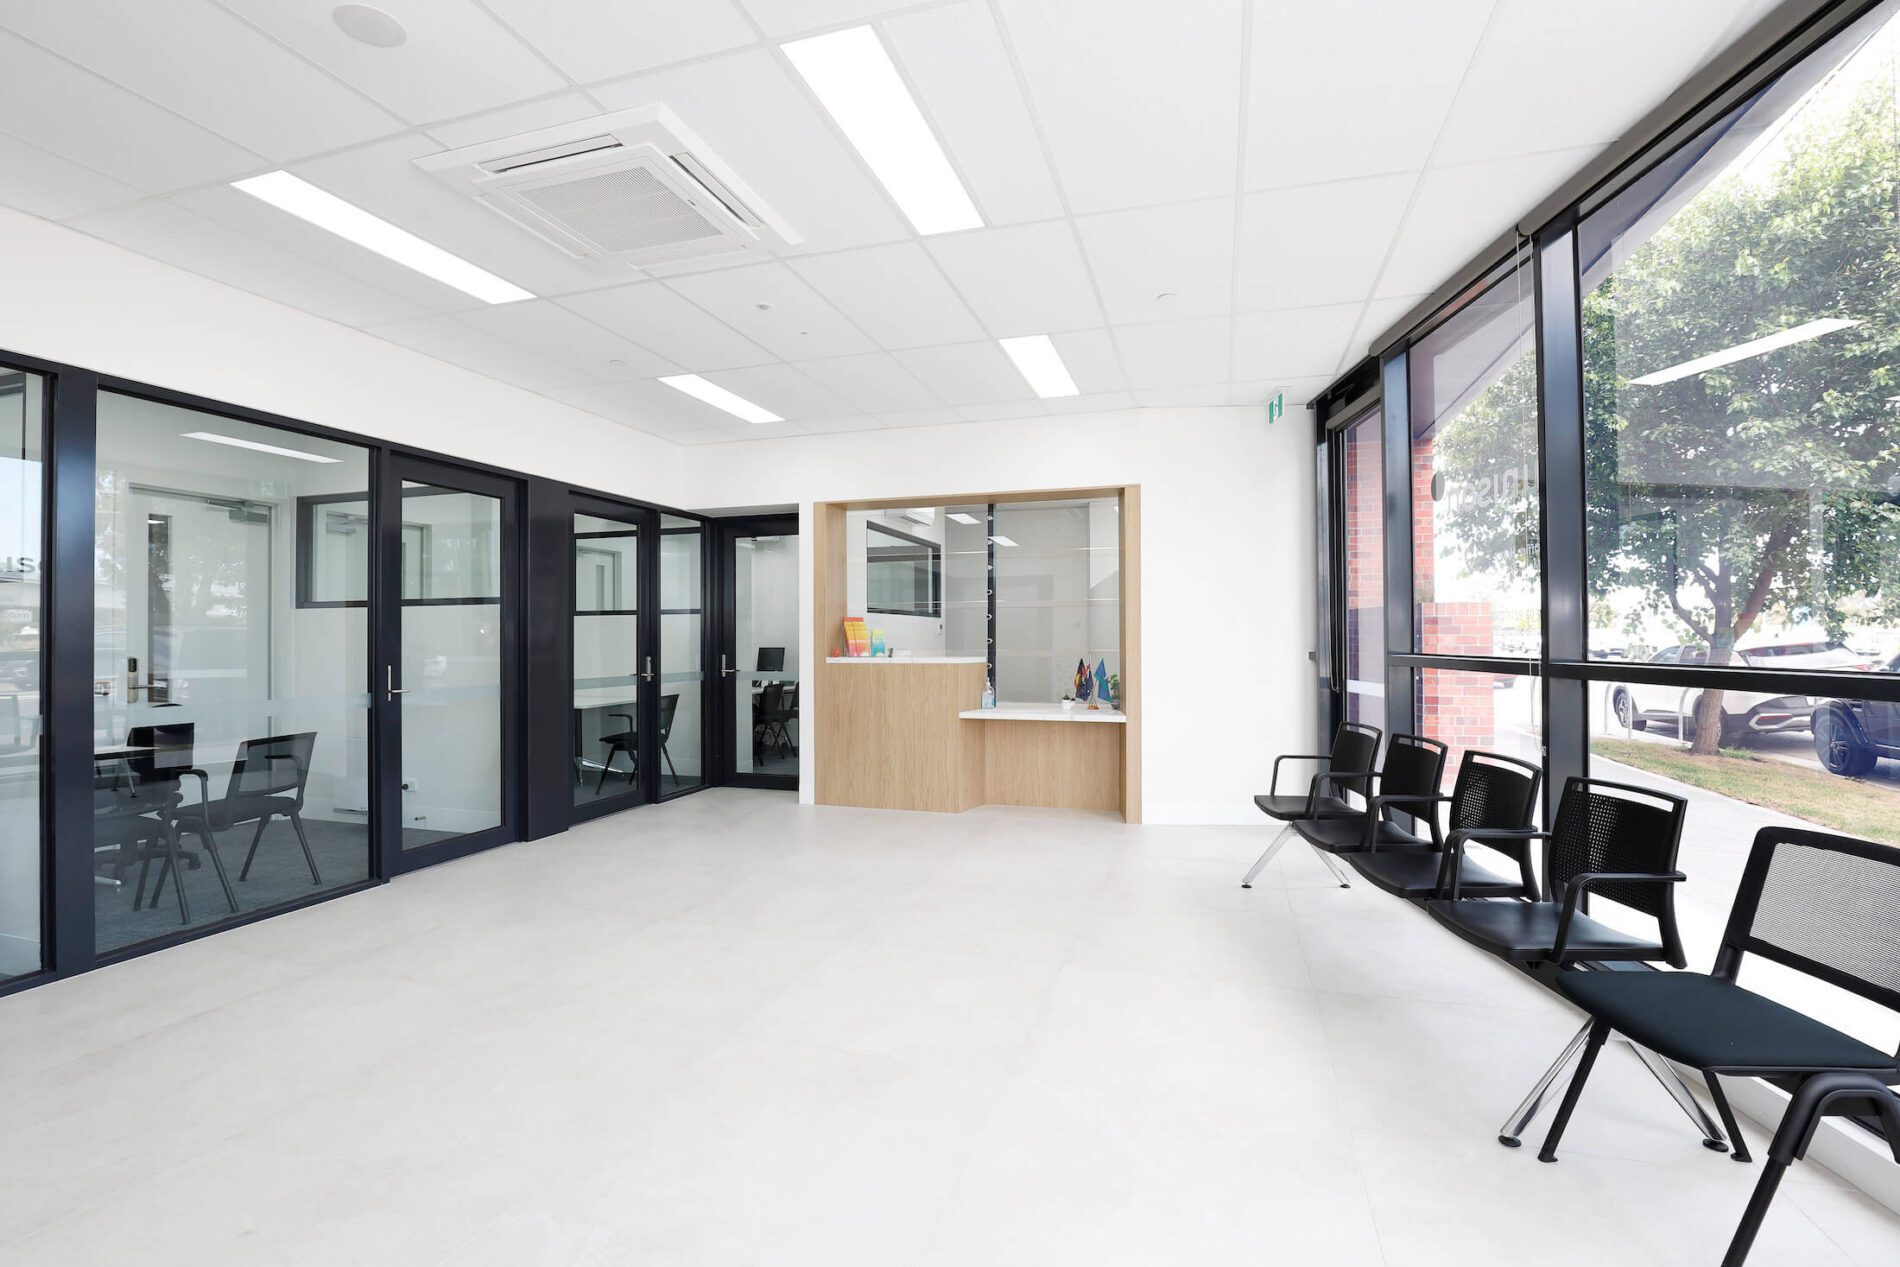 Bright building foyer with meeting rooms and concierge desk, black seating by window